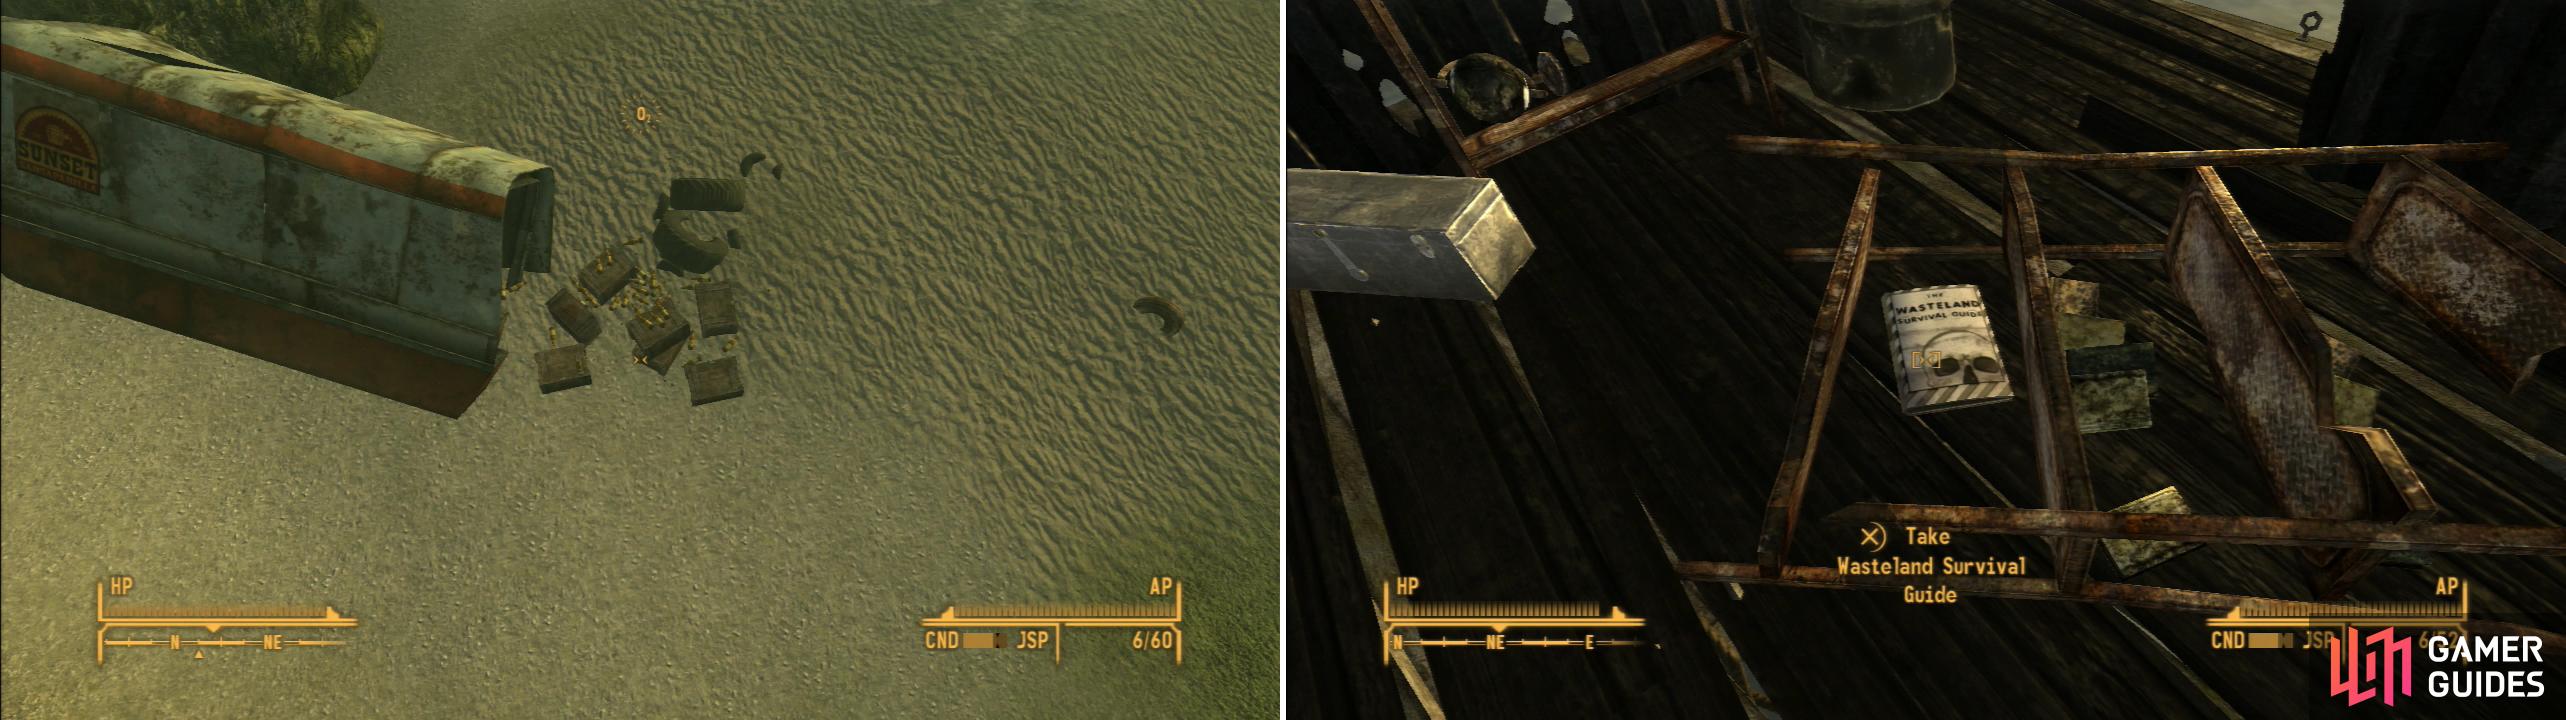 Near the Boulder Beach Campground you can find a submerged Sunset Sarsaparilla truck (left) the Lakelurk-infested Scavanger Platform is worth clearing, as a copy of the Wasteland Survival Guide rests upon it (right).